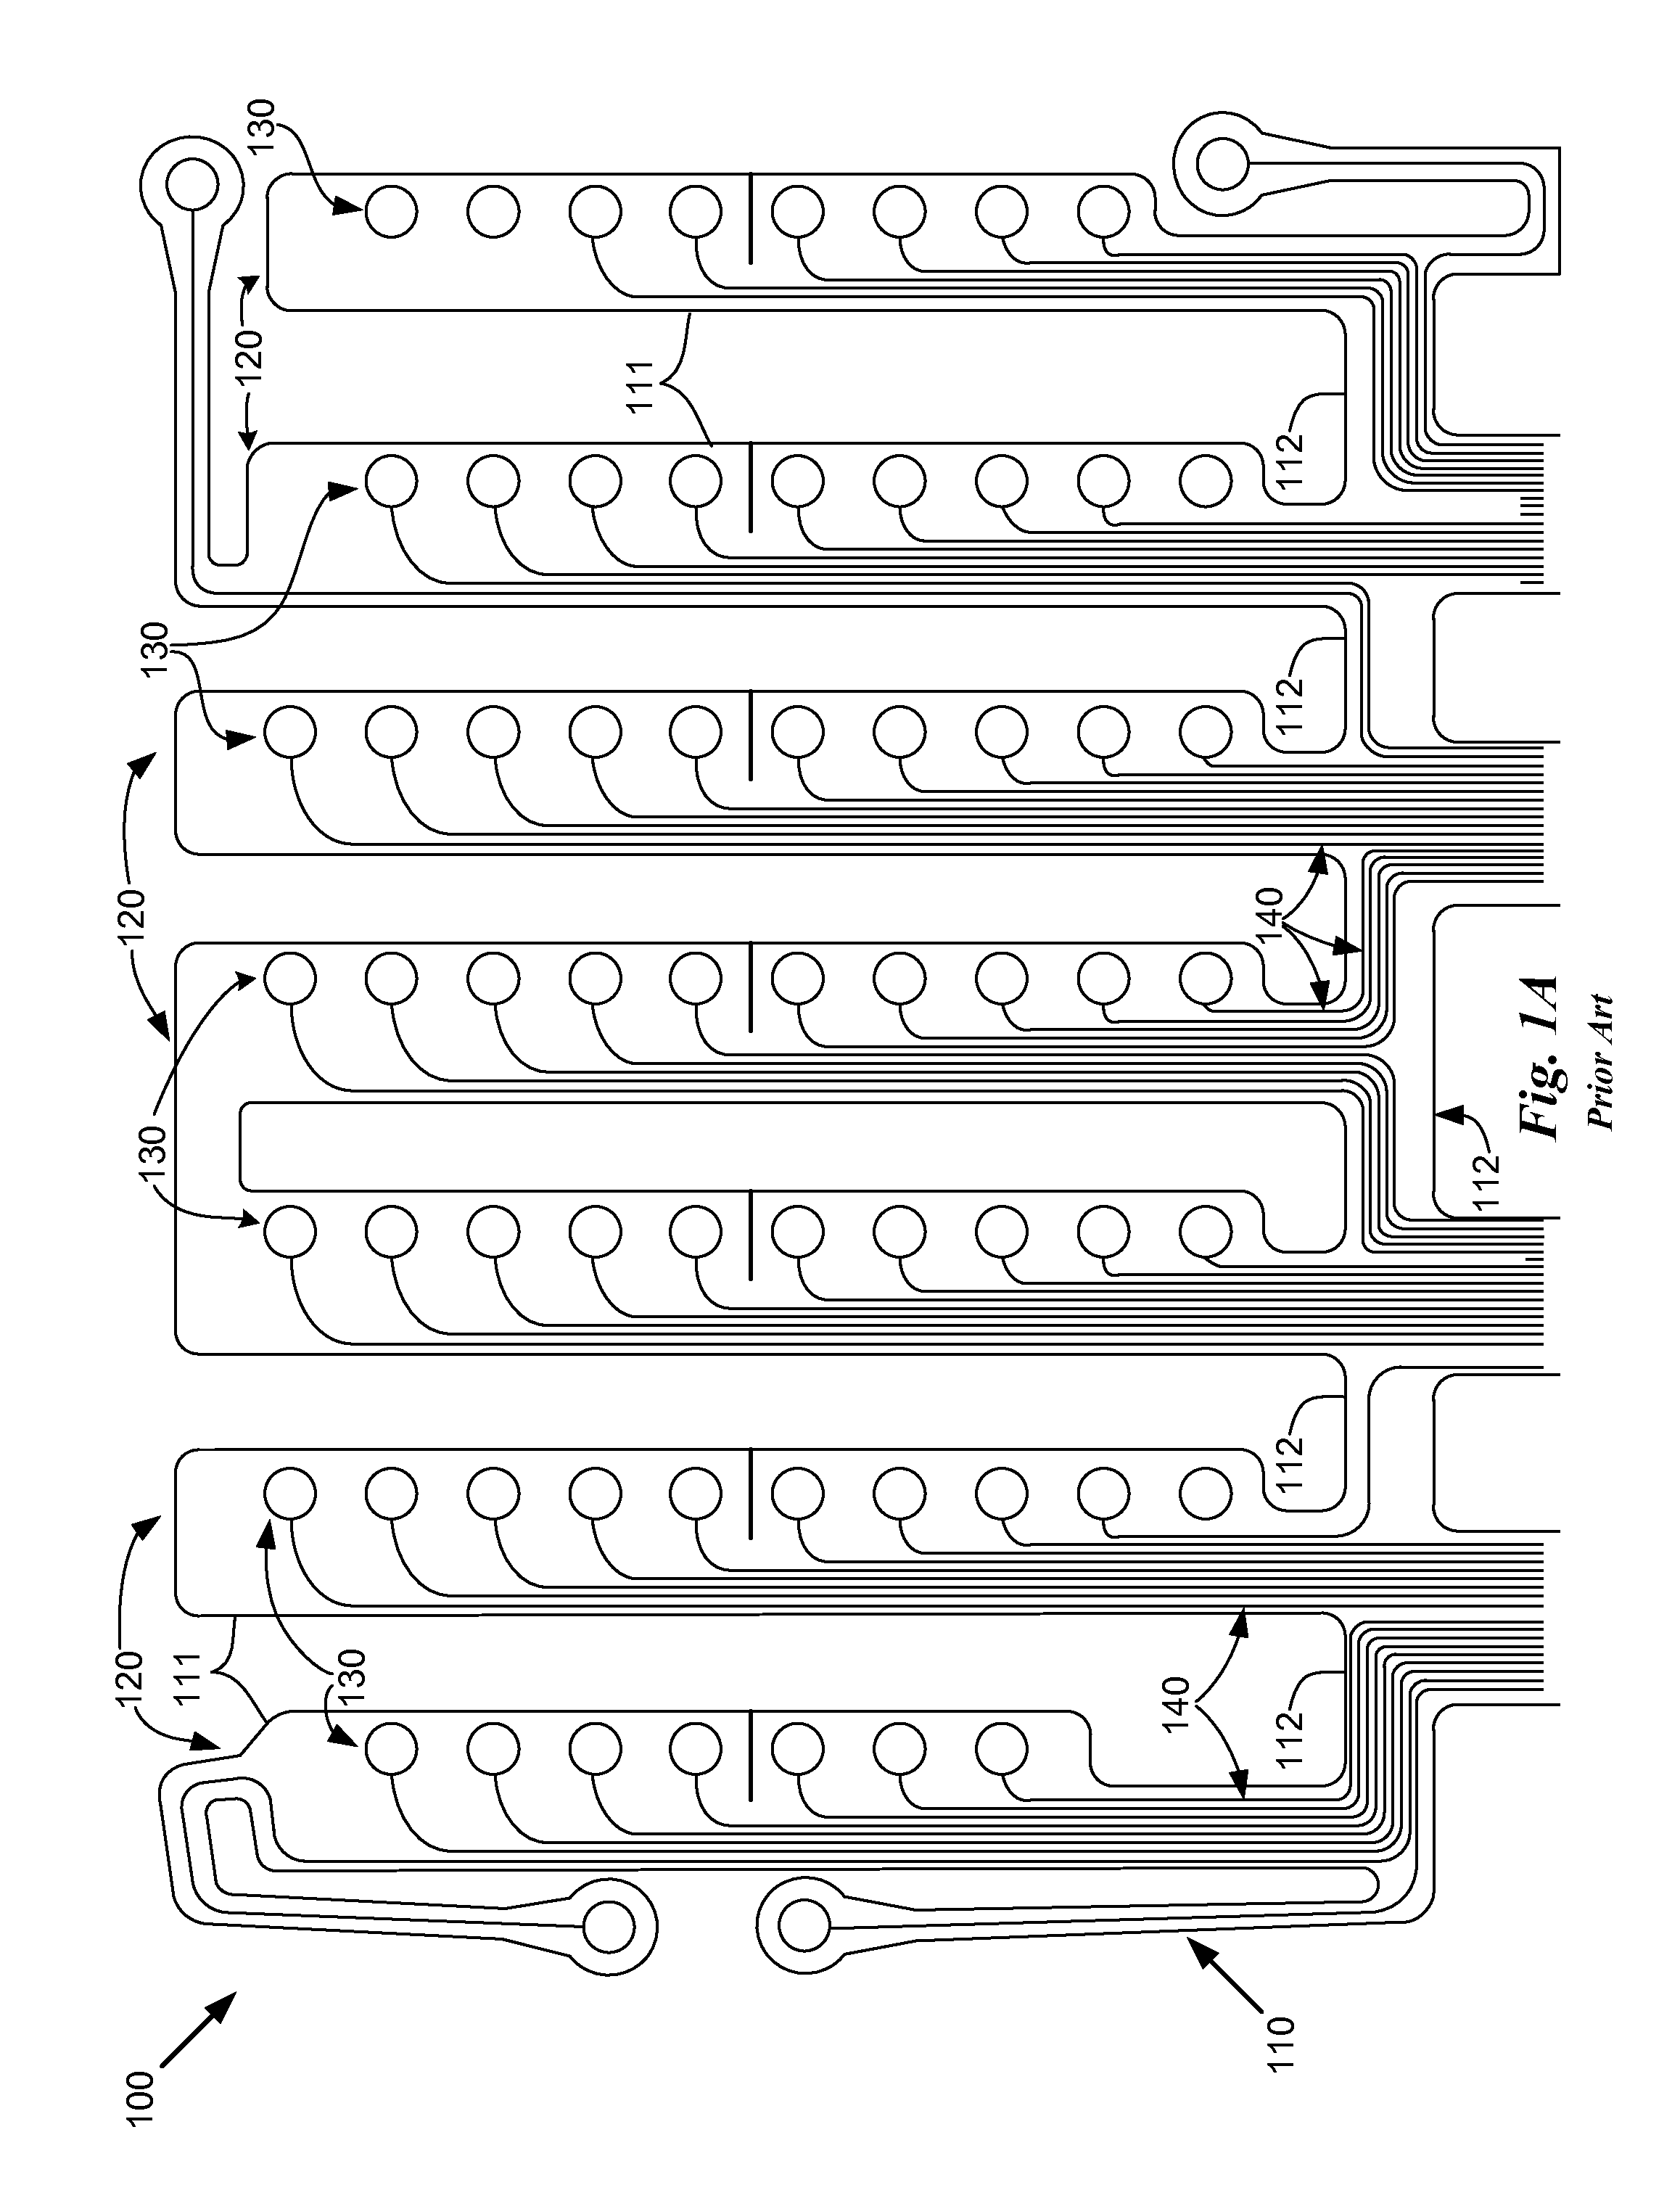 Sensor device with flexible joints